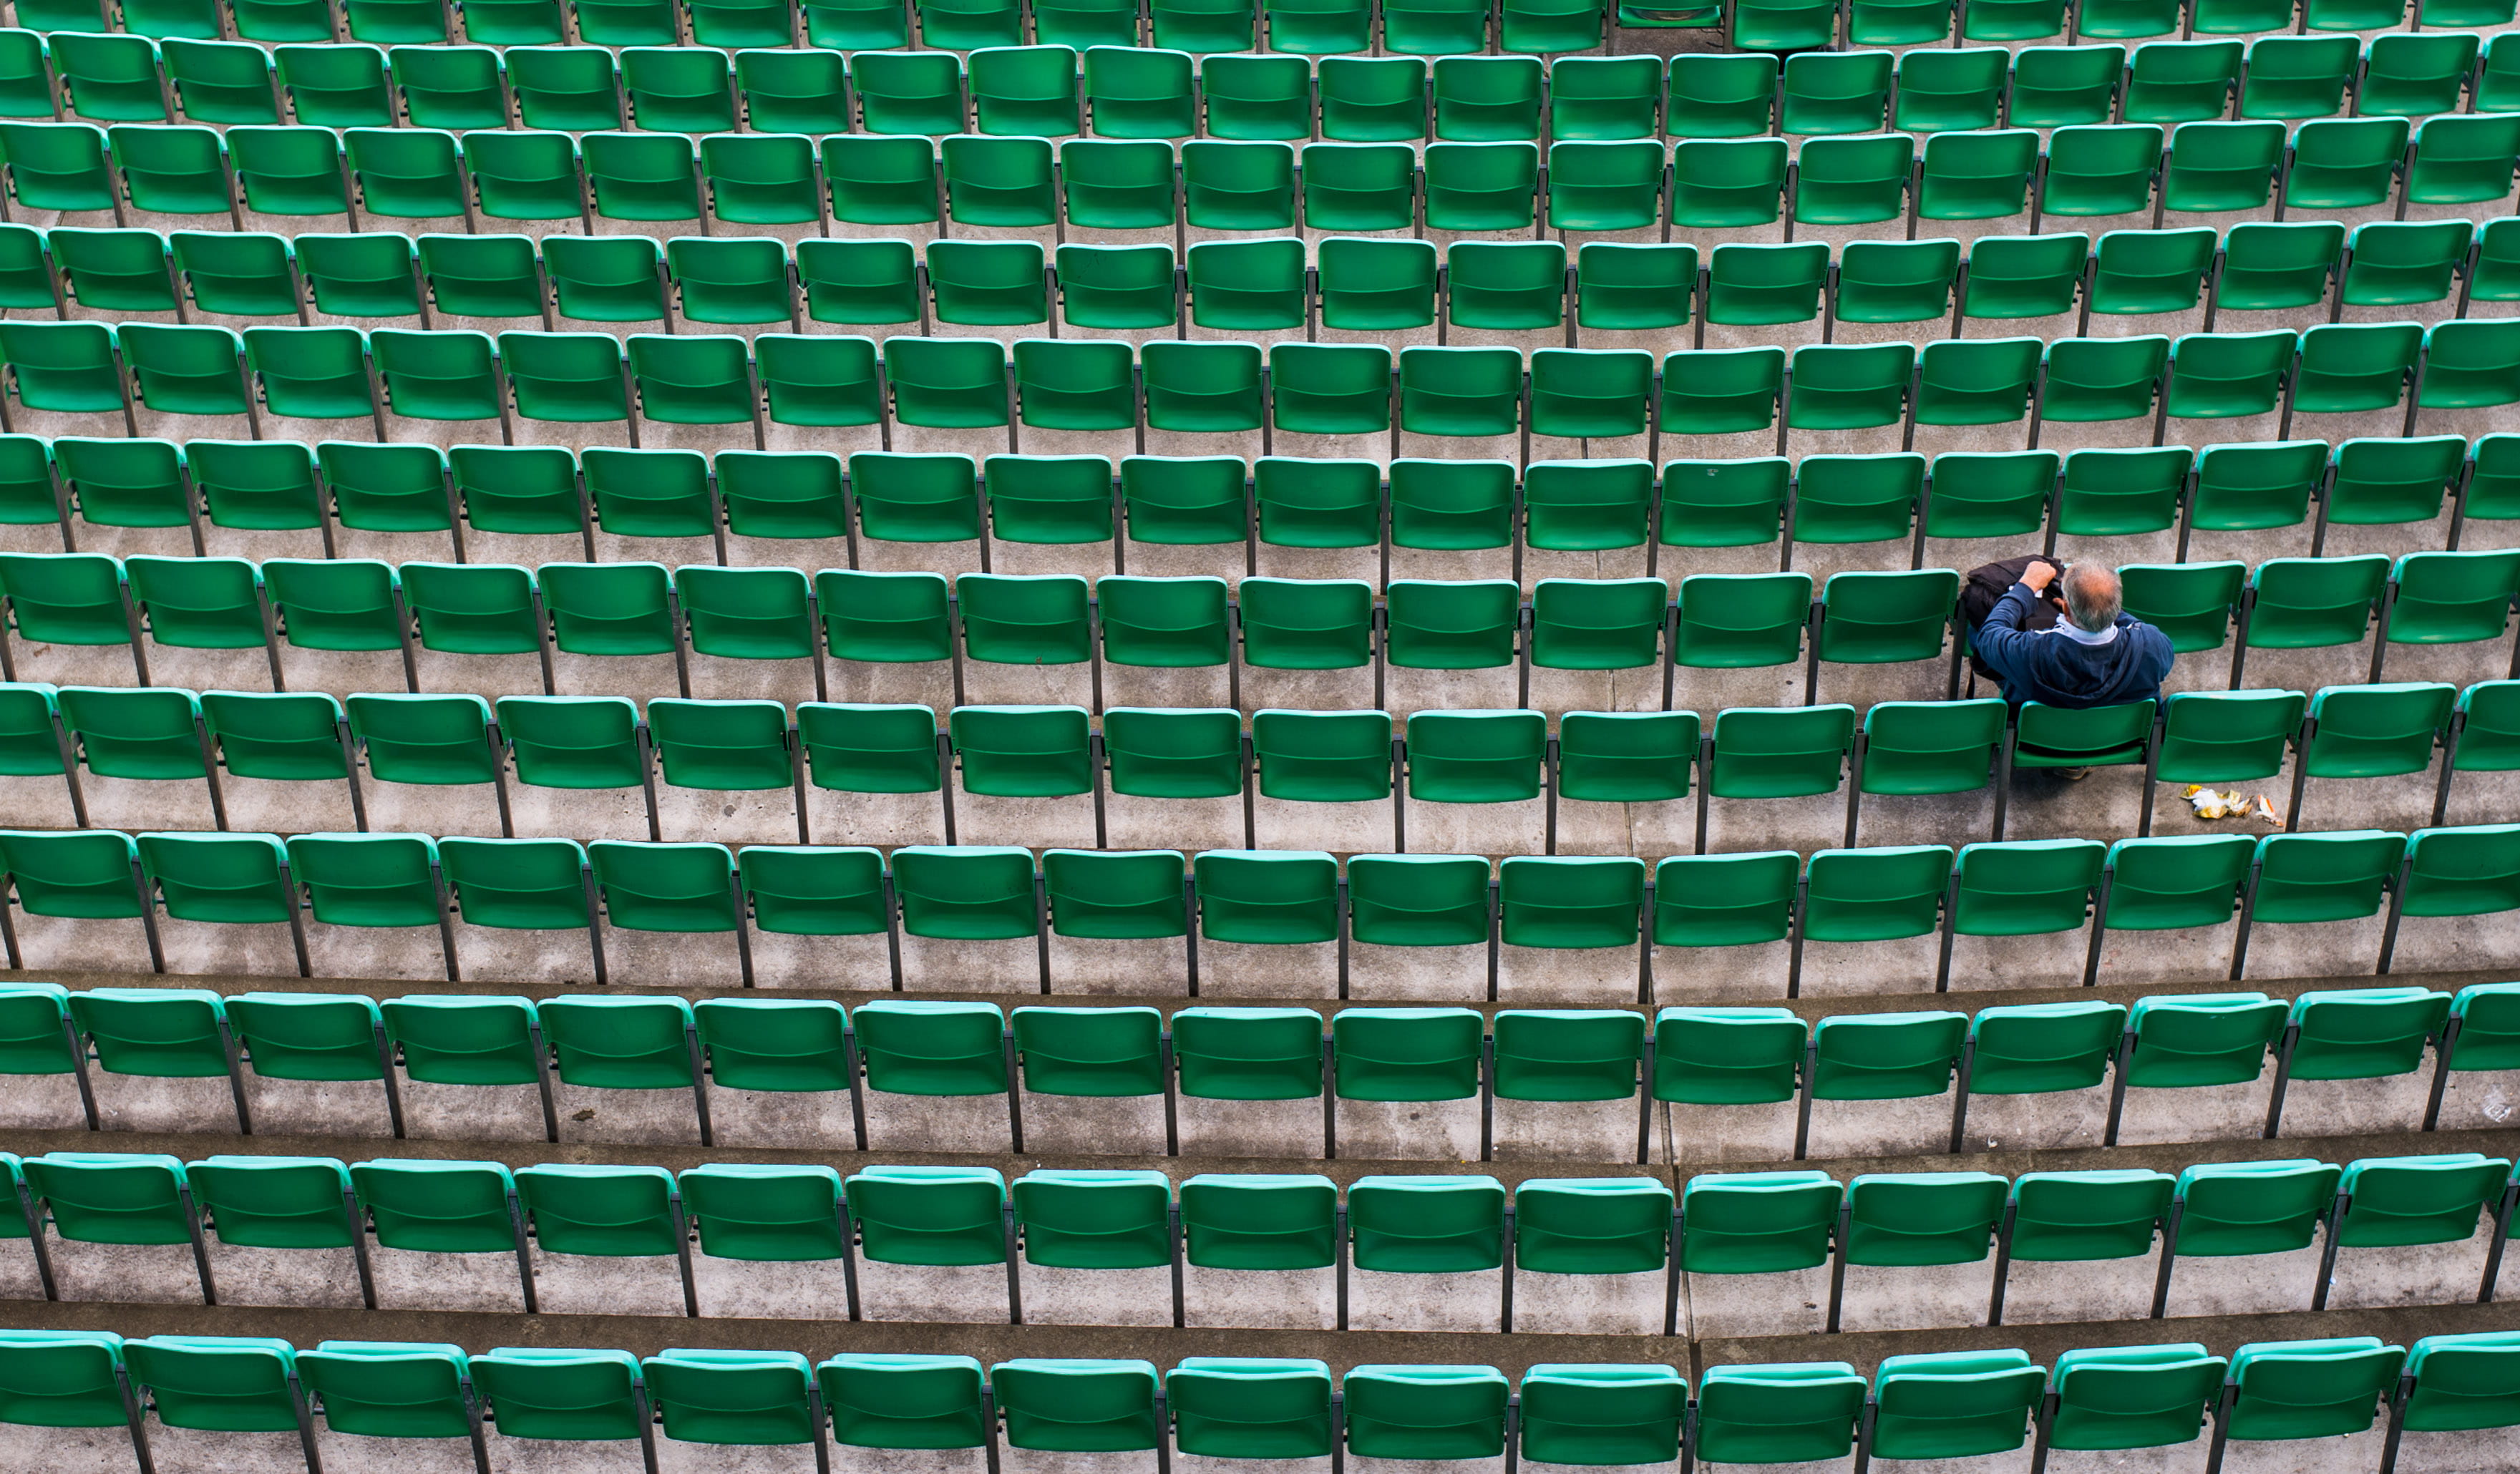 man sitting on bleachers, person sitting on green chairs, seats